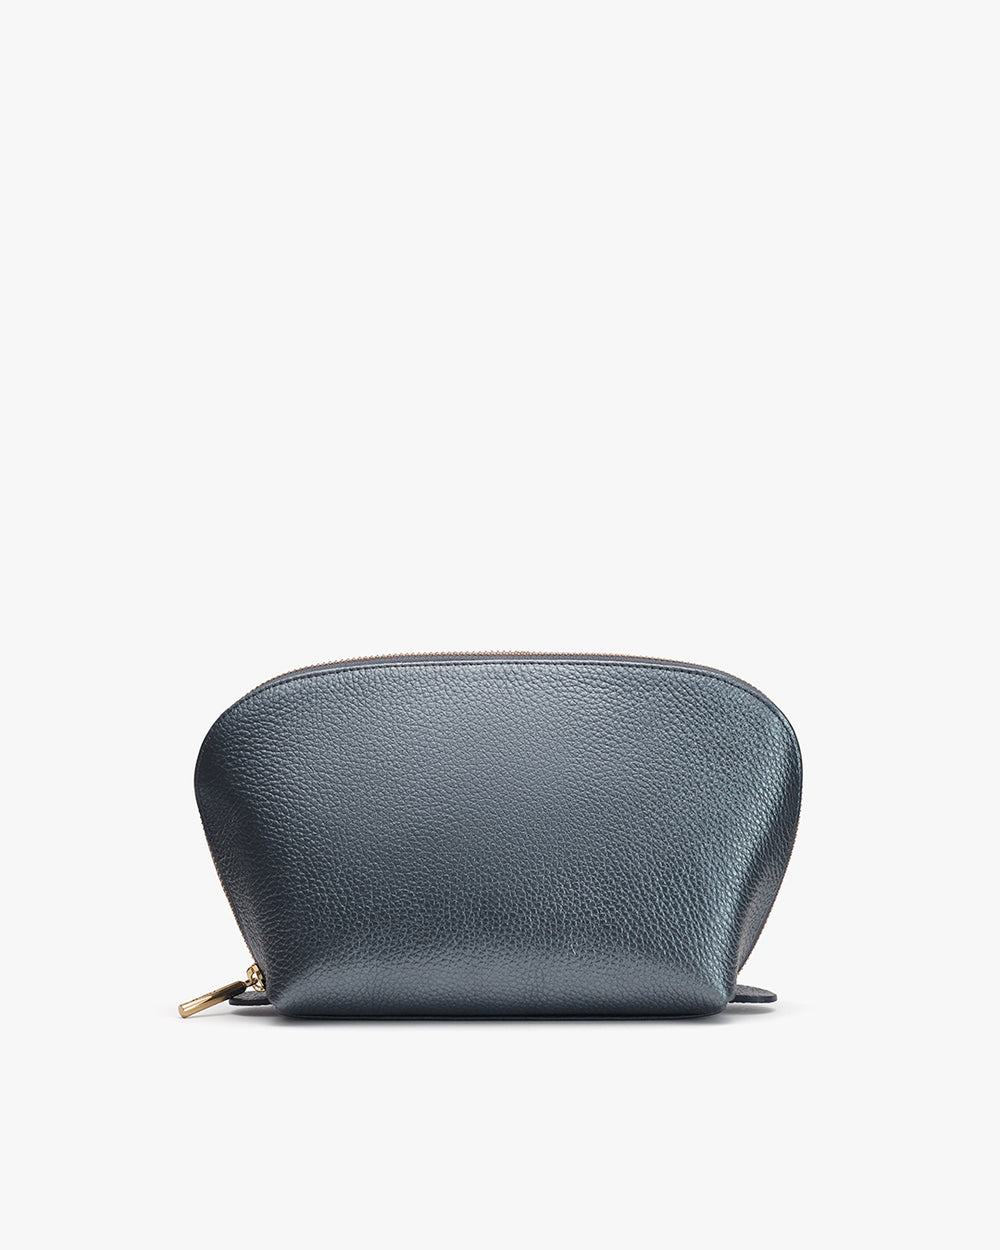 Small zippered pouch standing upright on a plain background.